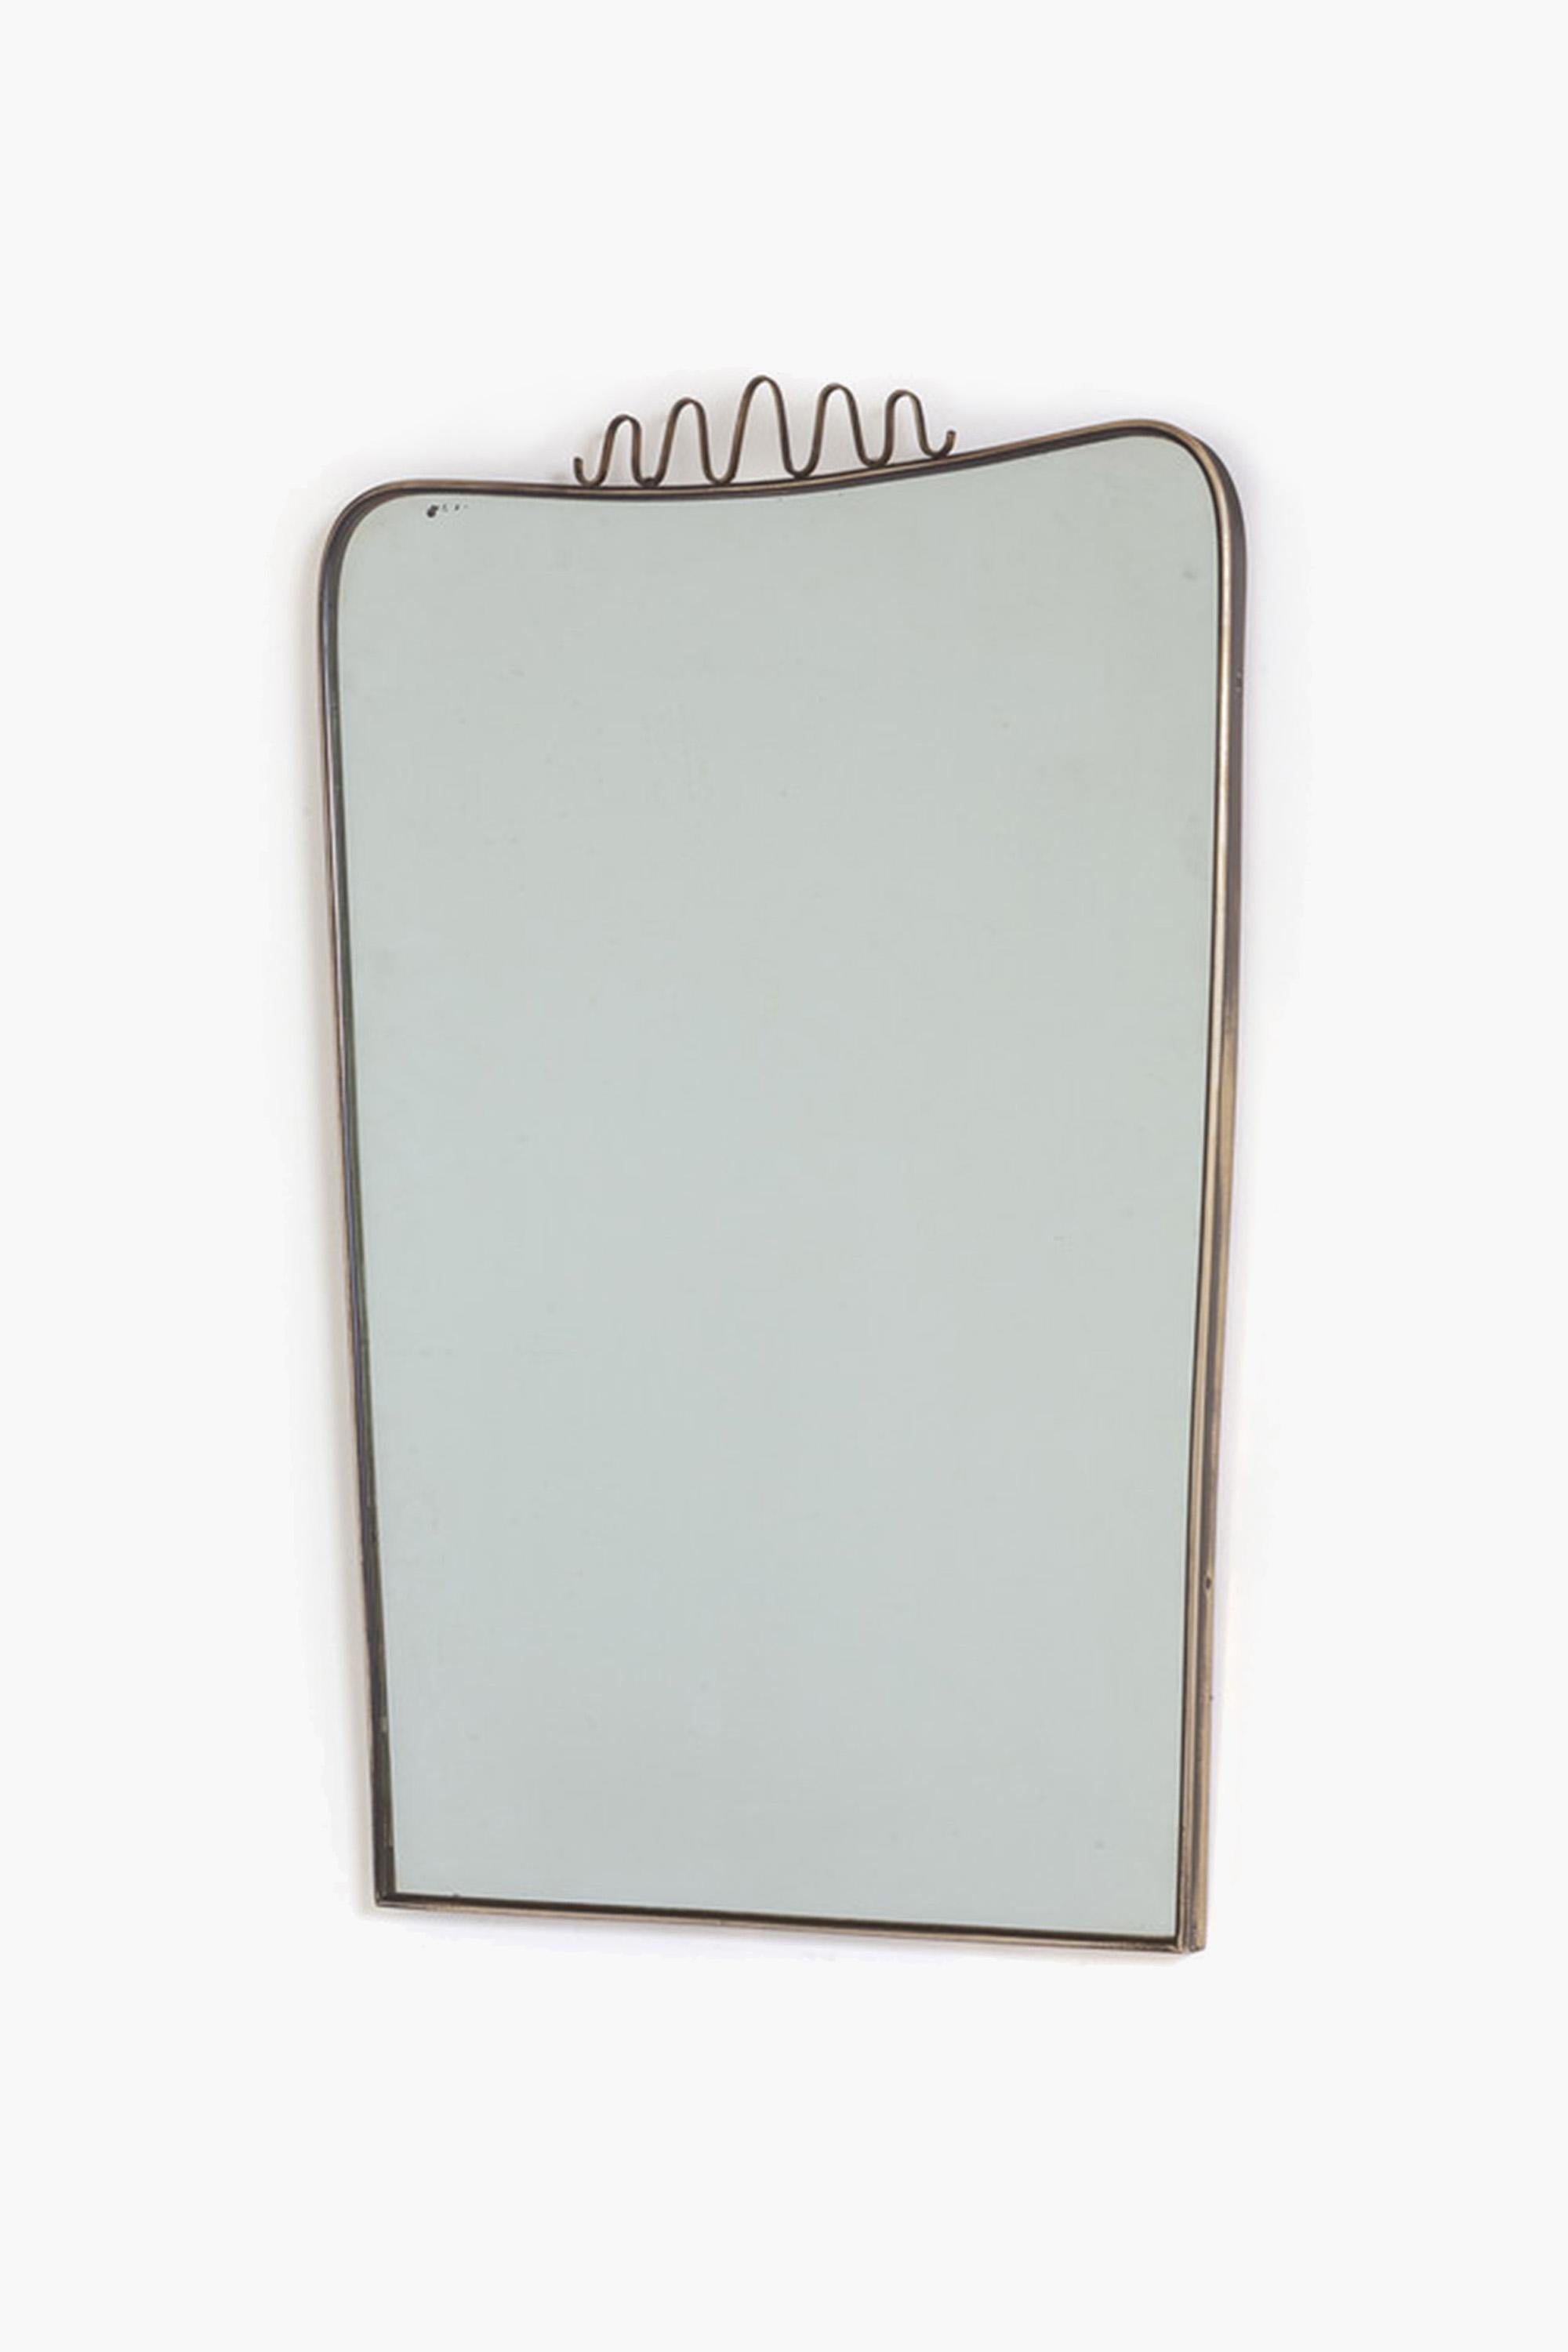 Italian Brass Mirror in The Style of Gio Ponti, 1950s In Good Condition For Sale In London, GB